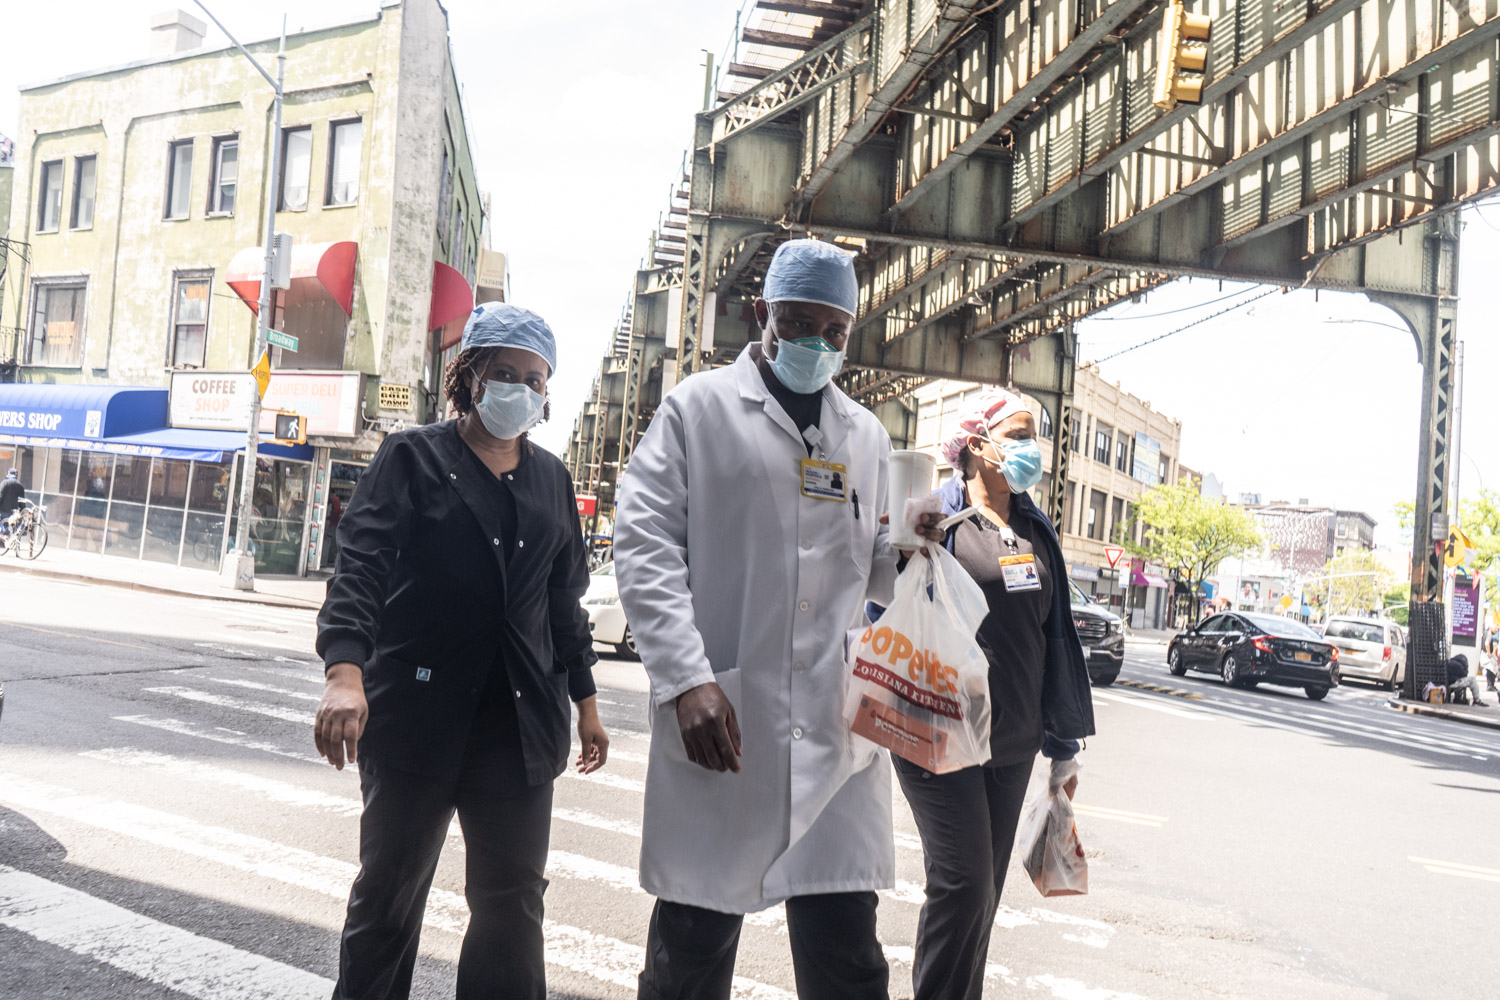 May 16, 2020: Woodhull Medical Center staffers heading back to work at Flushing Avenue and Broadway in Brooklyn, New York. © Camilo José Vergara